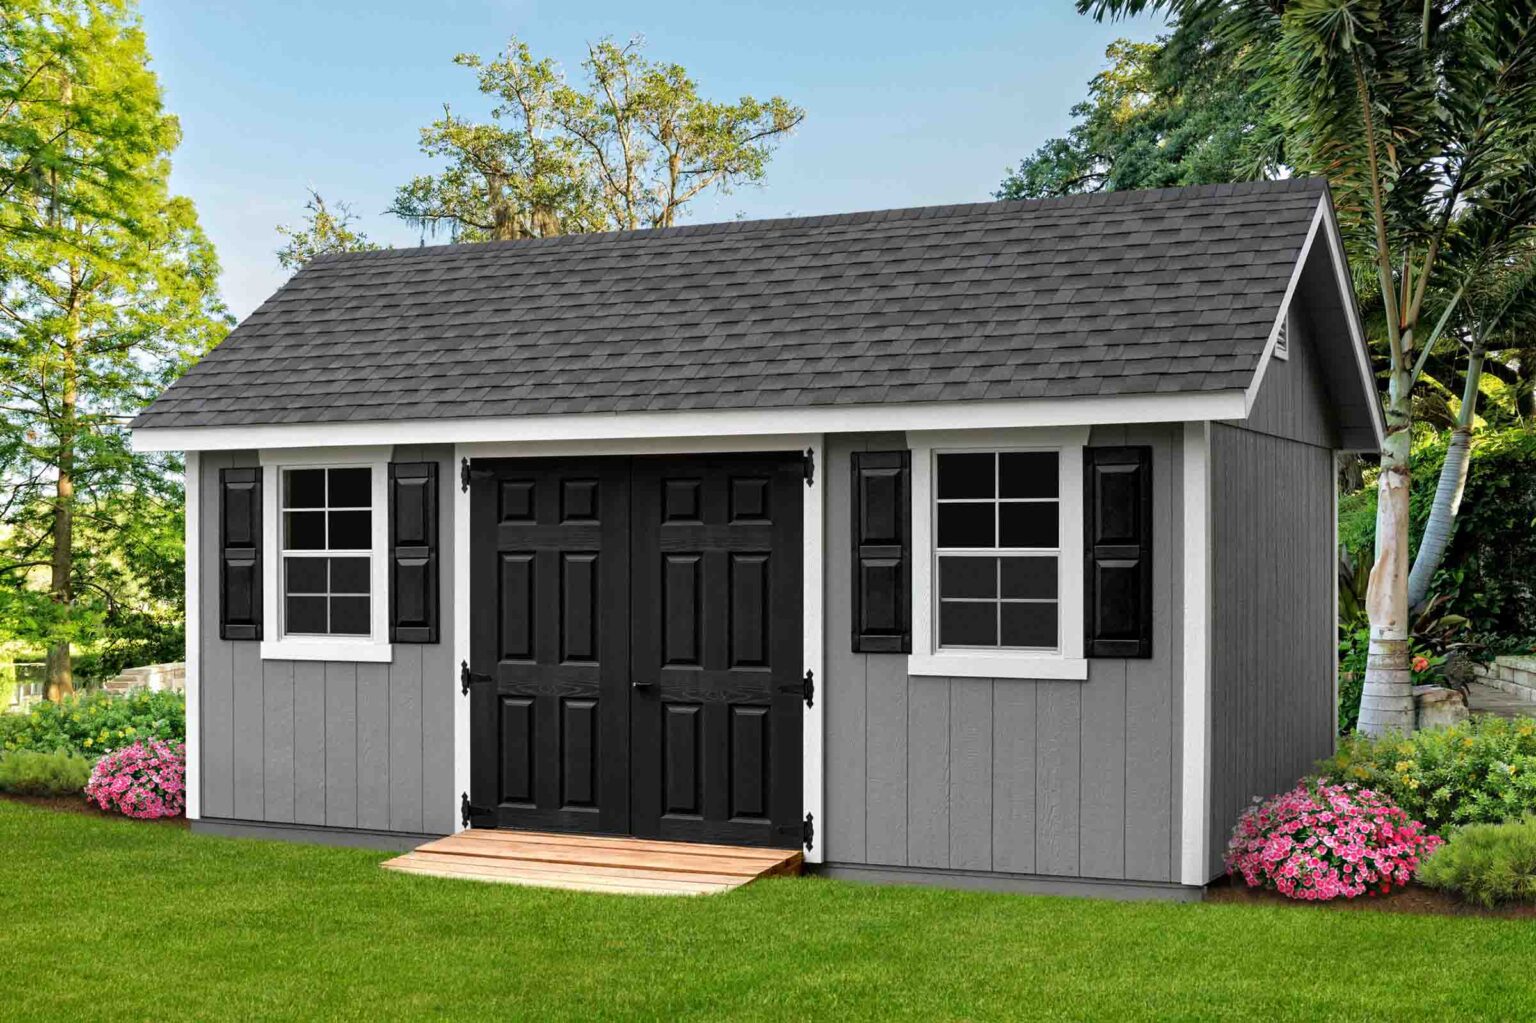 A storage shed is a great way to keep all your outdoor equipment safe and organized. Learn all about storage sheds and decide if one is right for you!